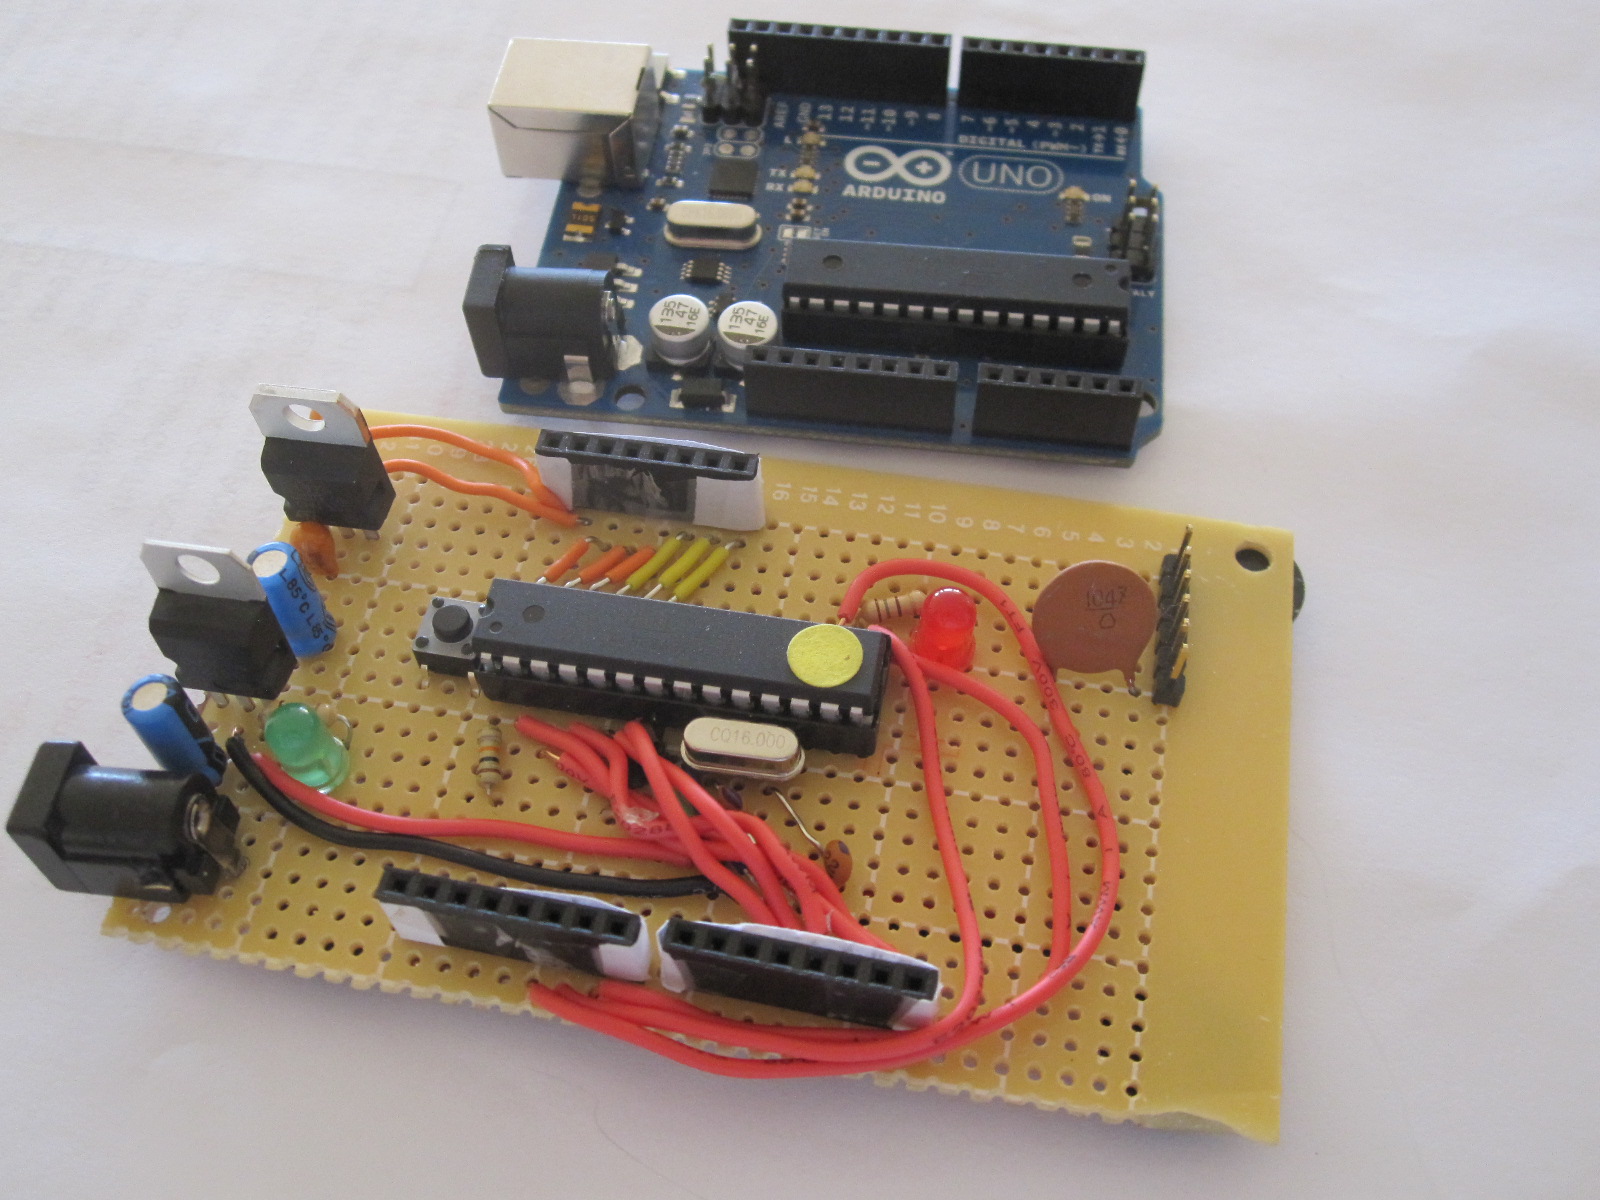 How to Make Your Own Arduino Board